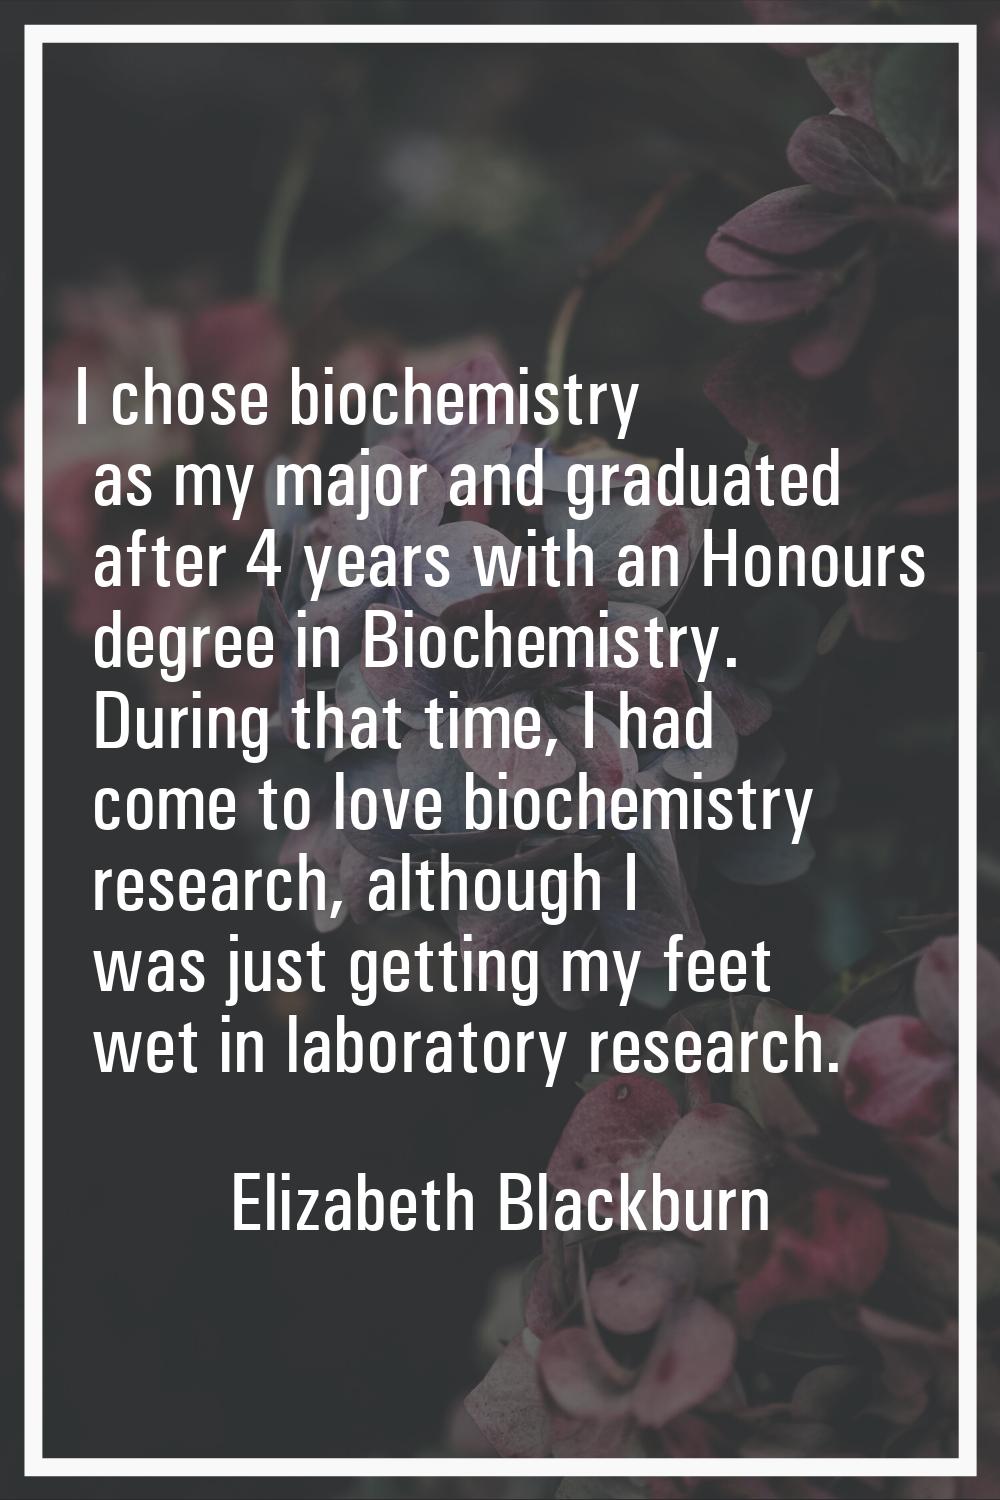 I chose biochemistry as my major and graduated after 4 years with an Honours degree in Biochemistry